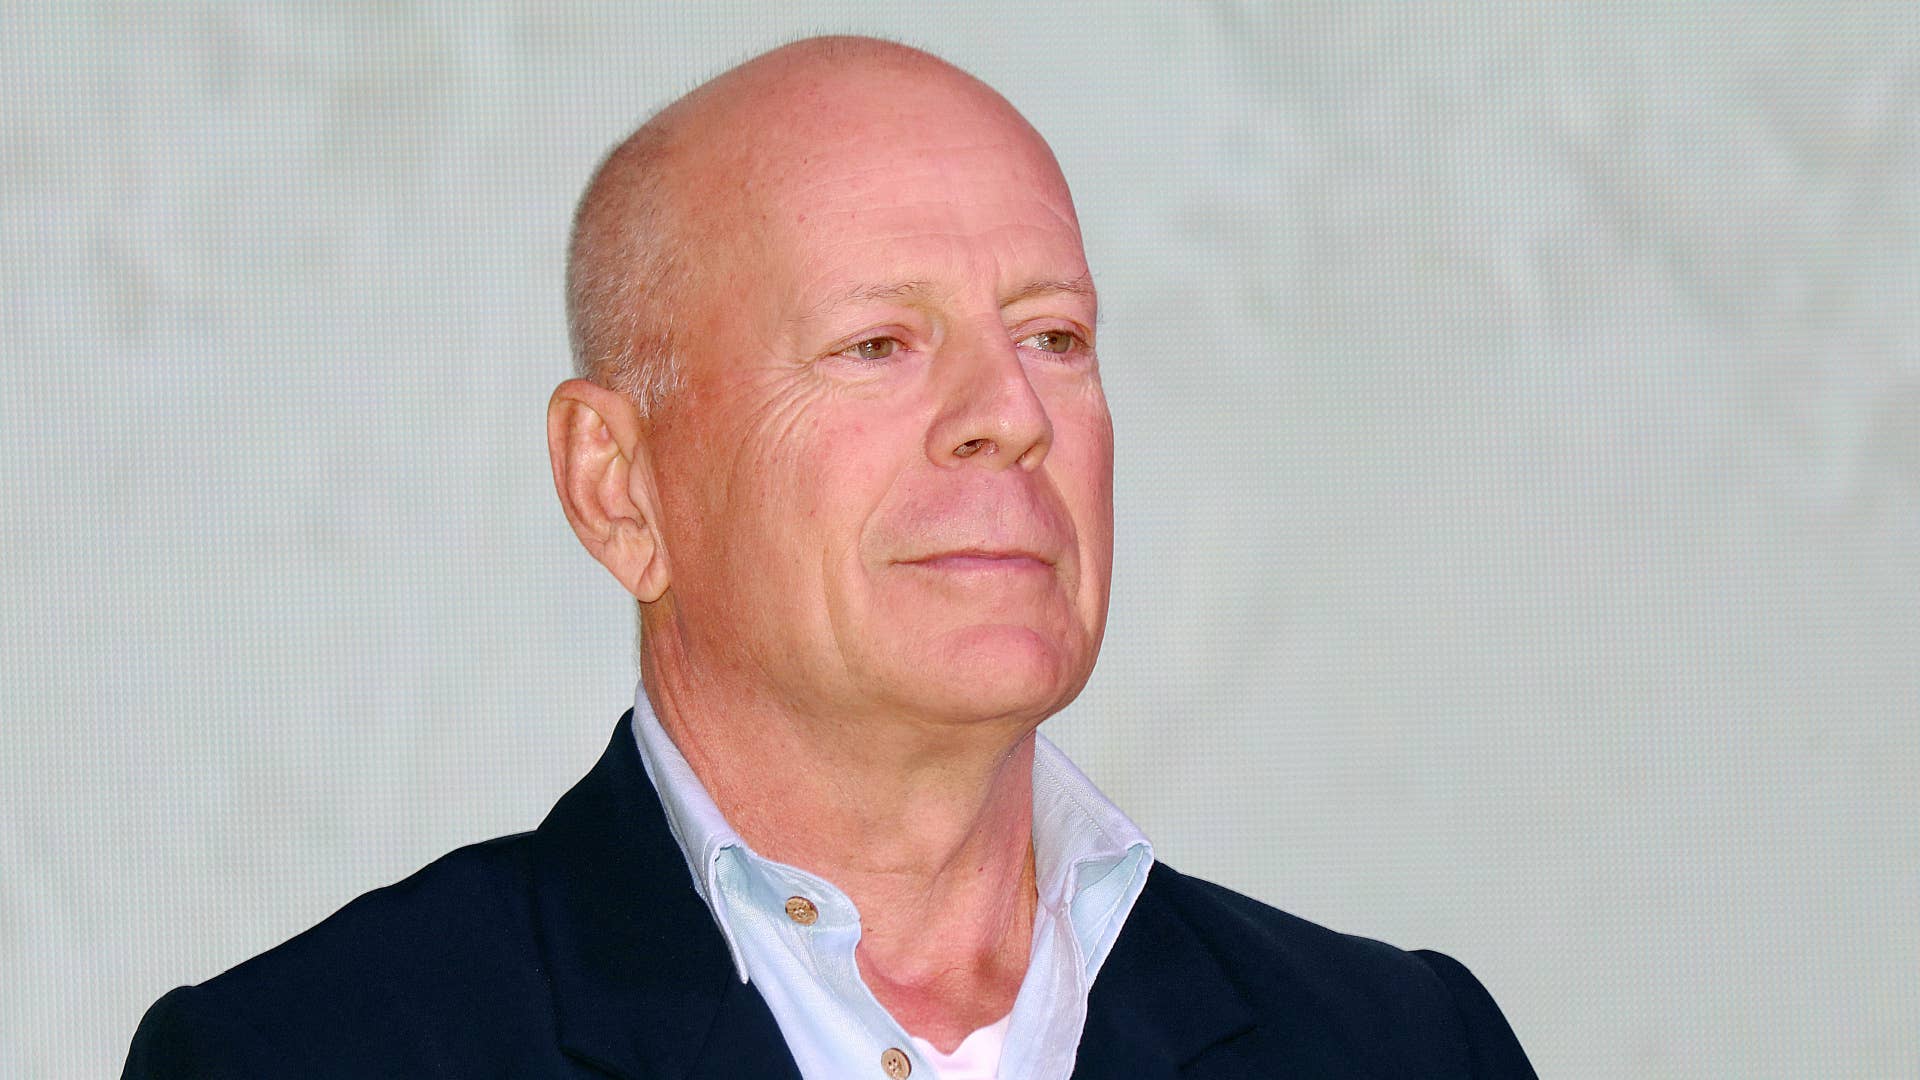 Bruce Willis "stepping away" from acting